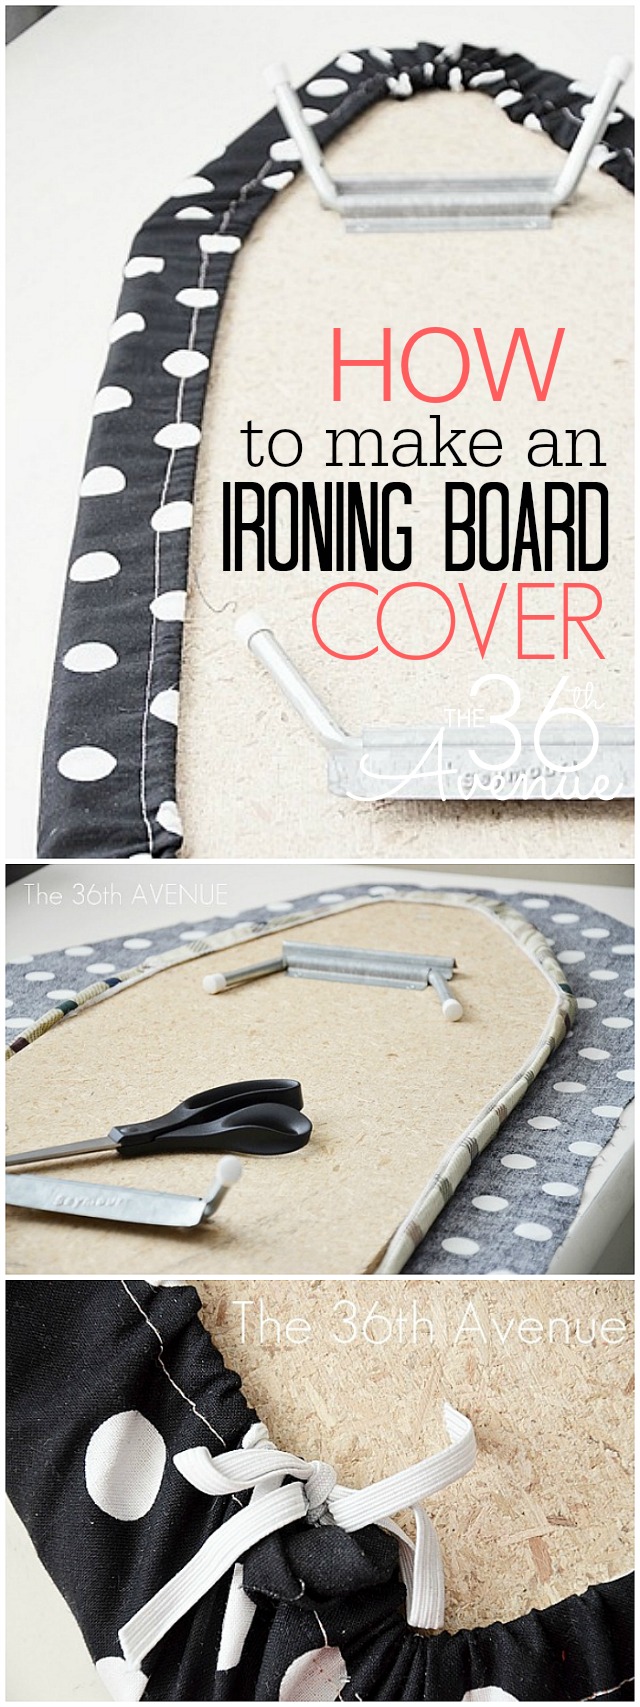 How to make an ironing board cover tutorial at the36thavenue.com